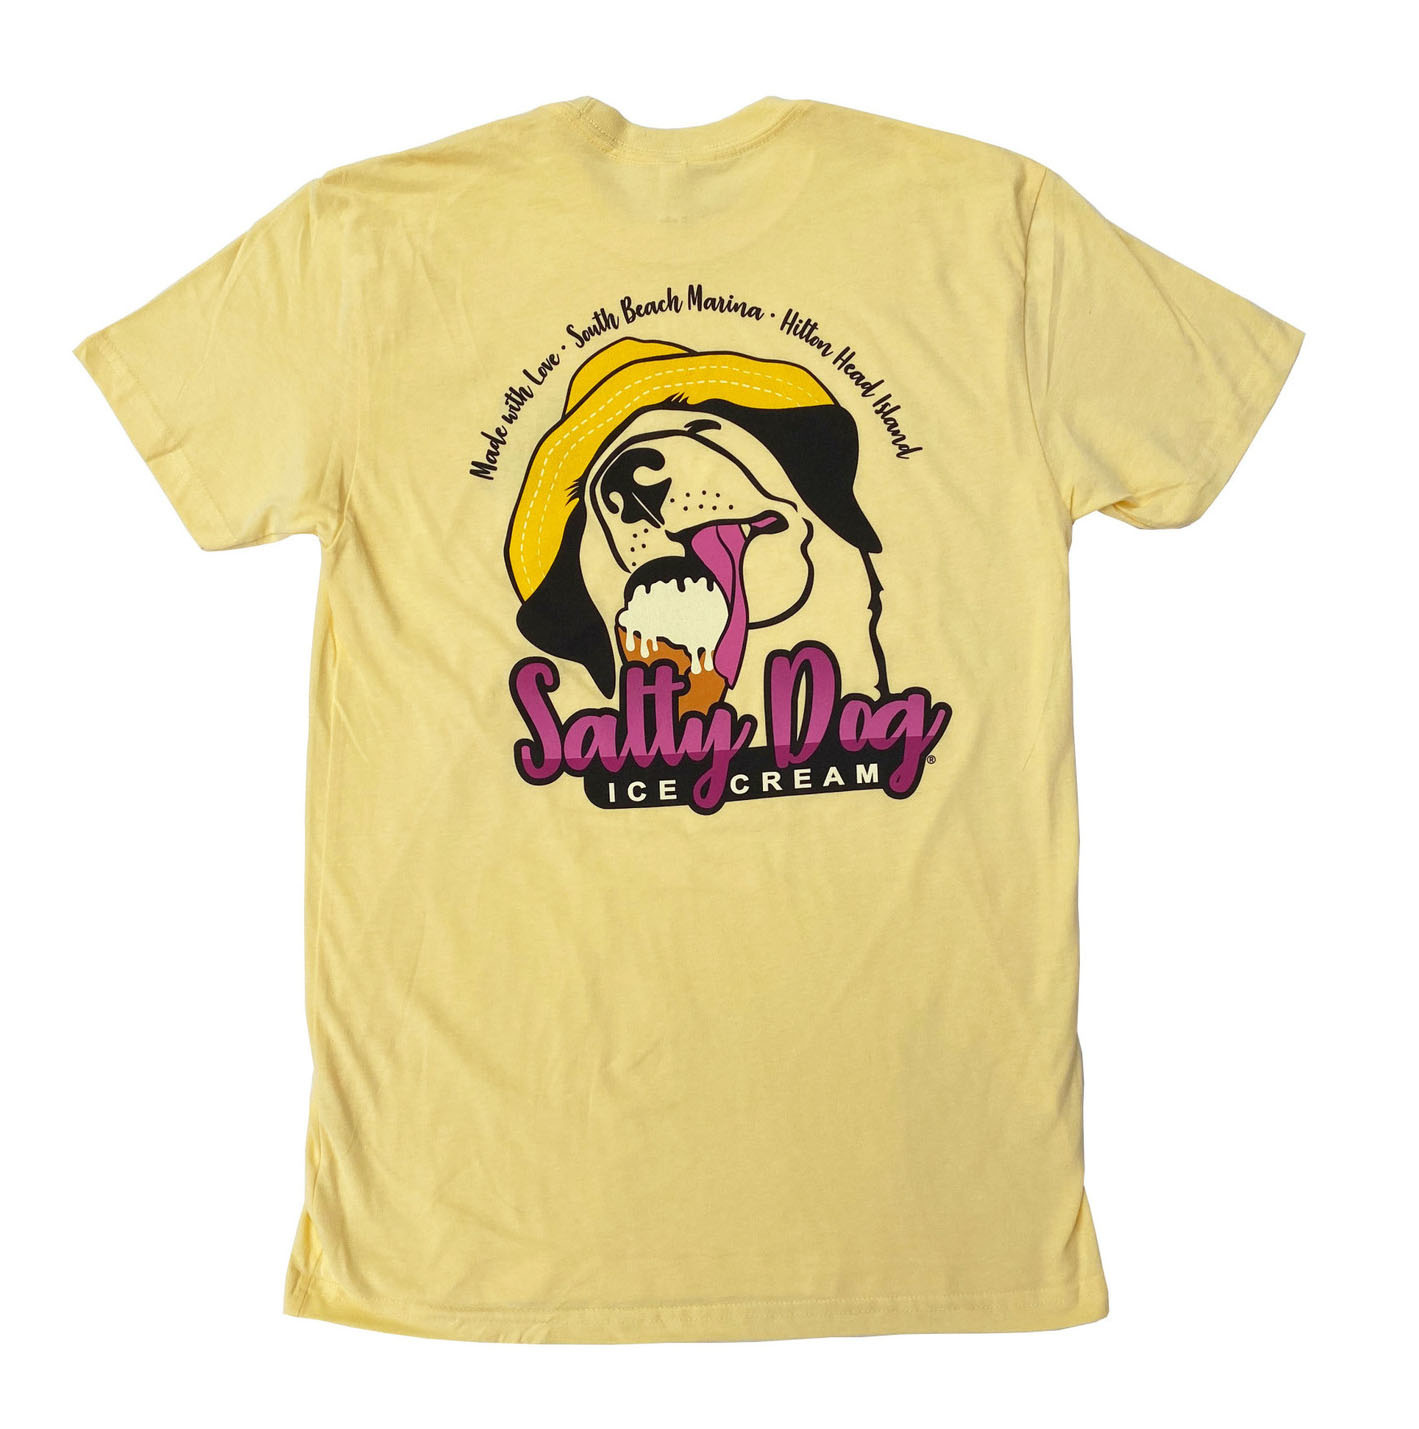 Sea Salt Ice Cream, Share it with your Friends! Essential T-Shirt